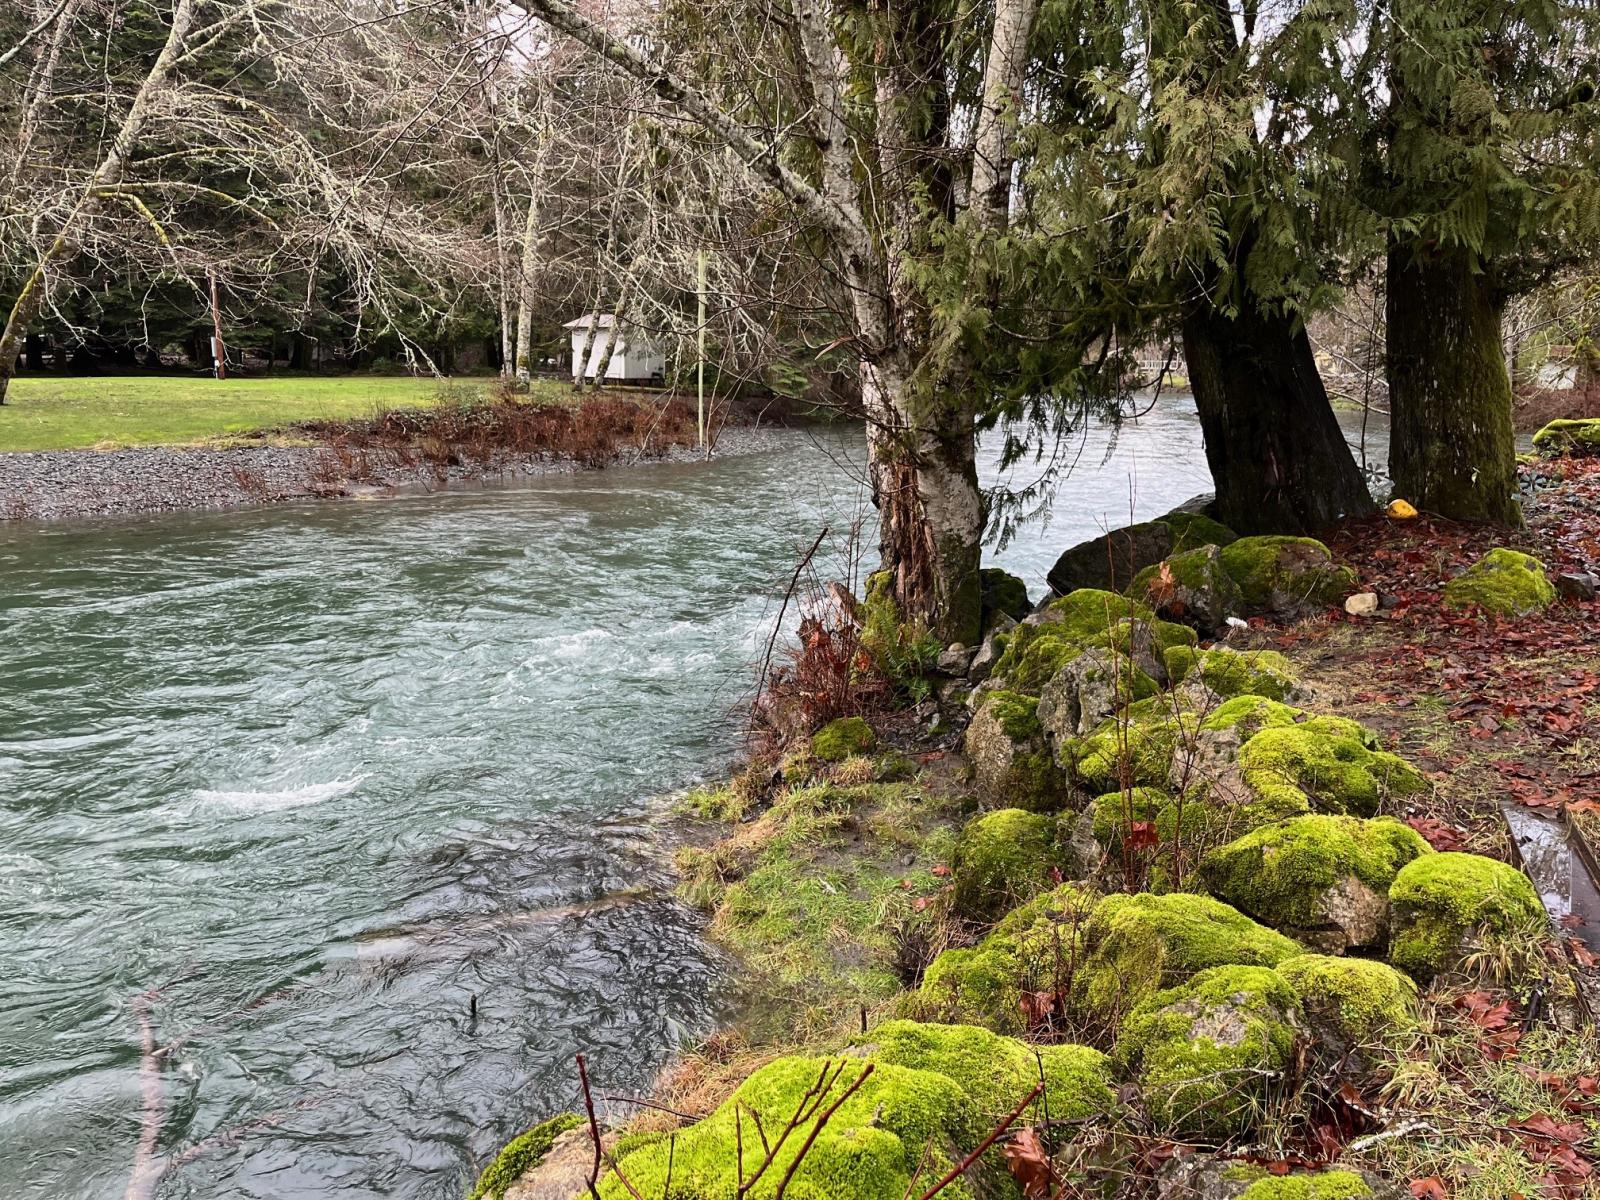 Duckabush river flows past a mossy outcropping.